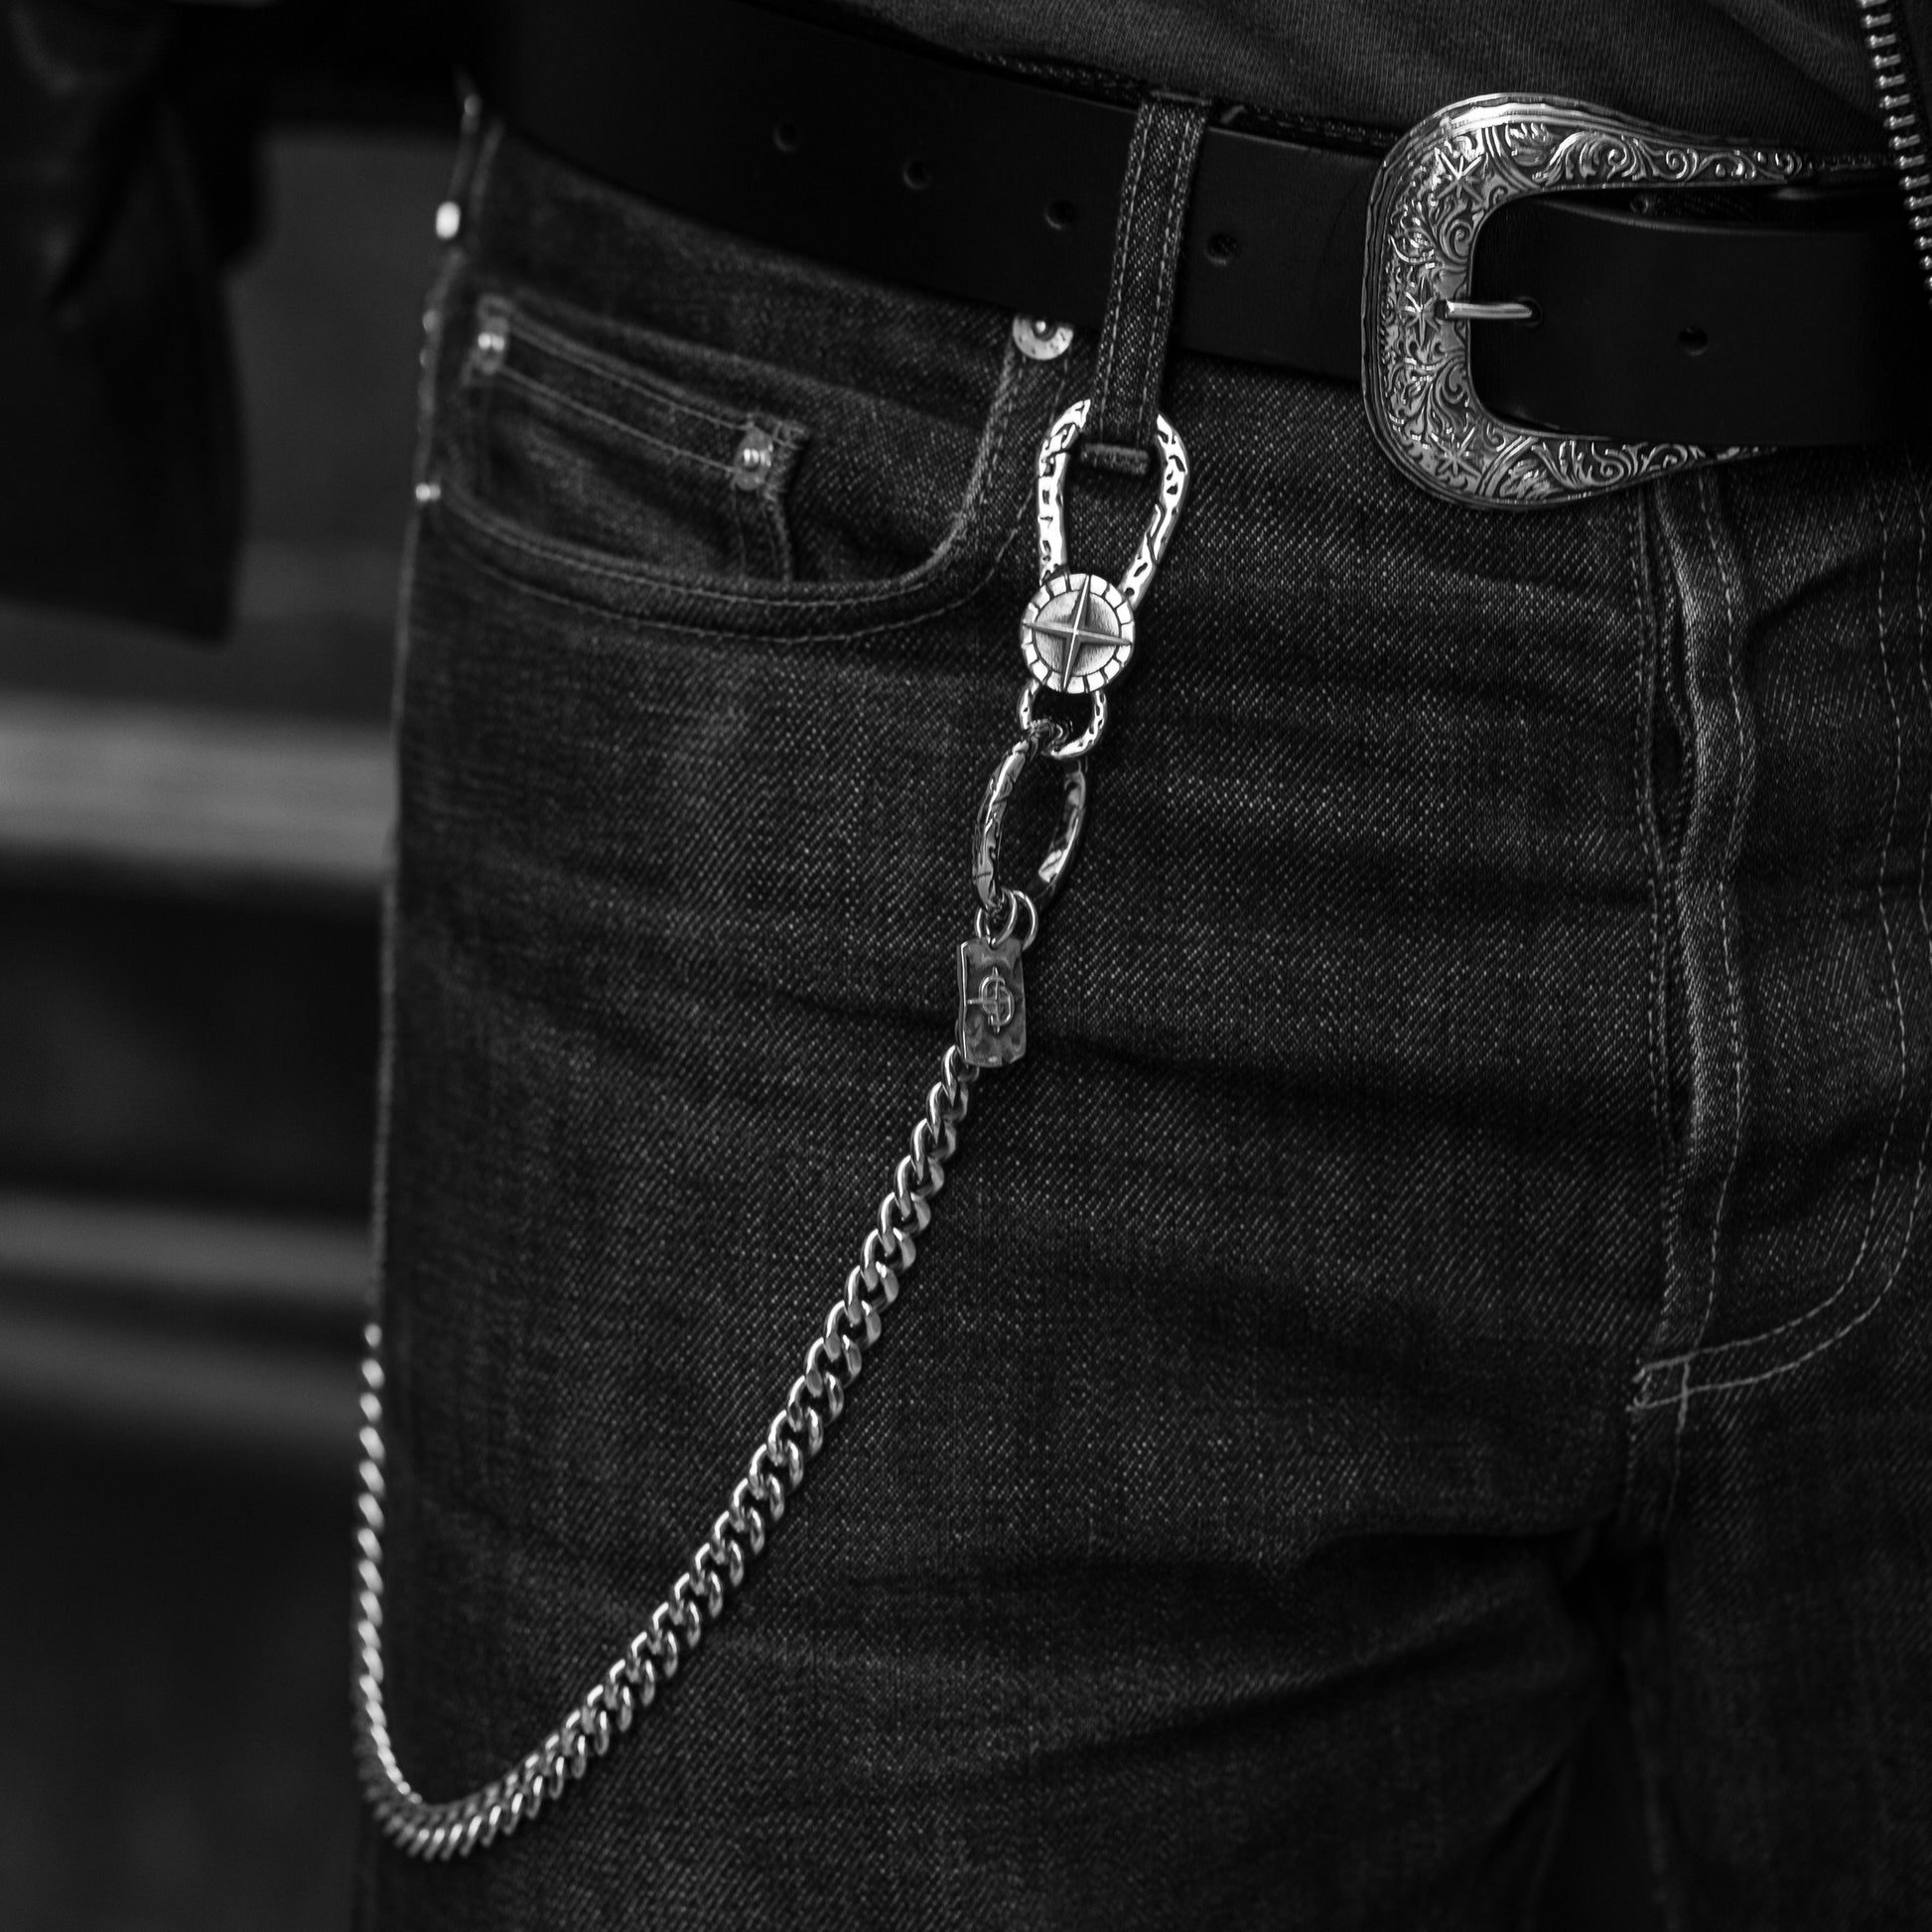 Wallet on a Chain in Black